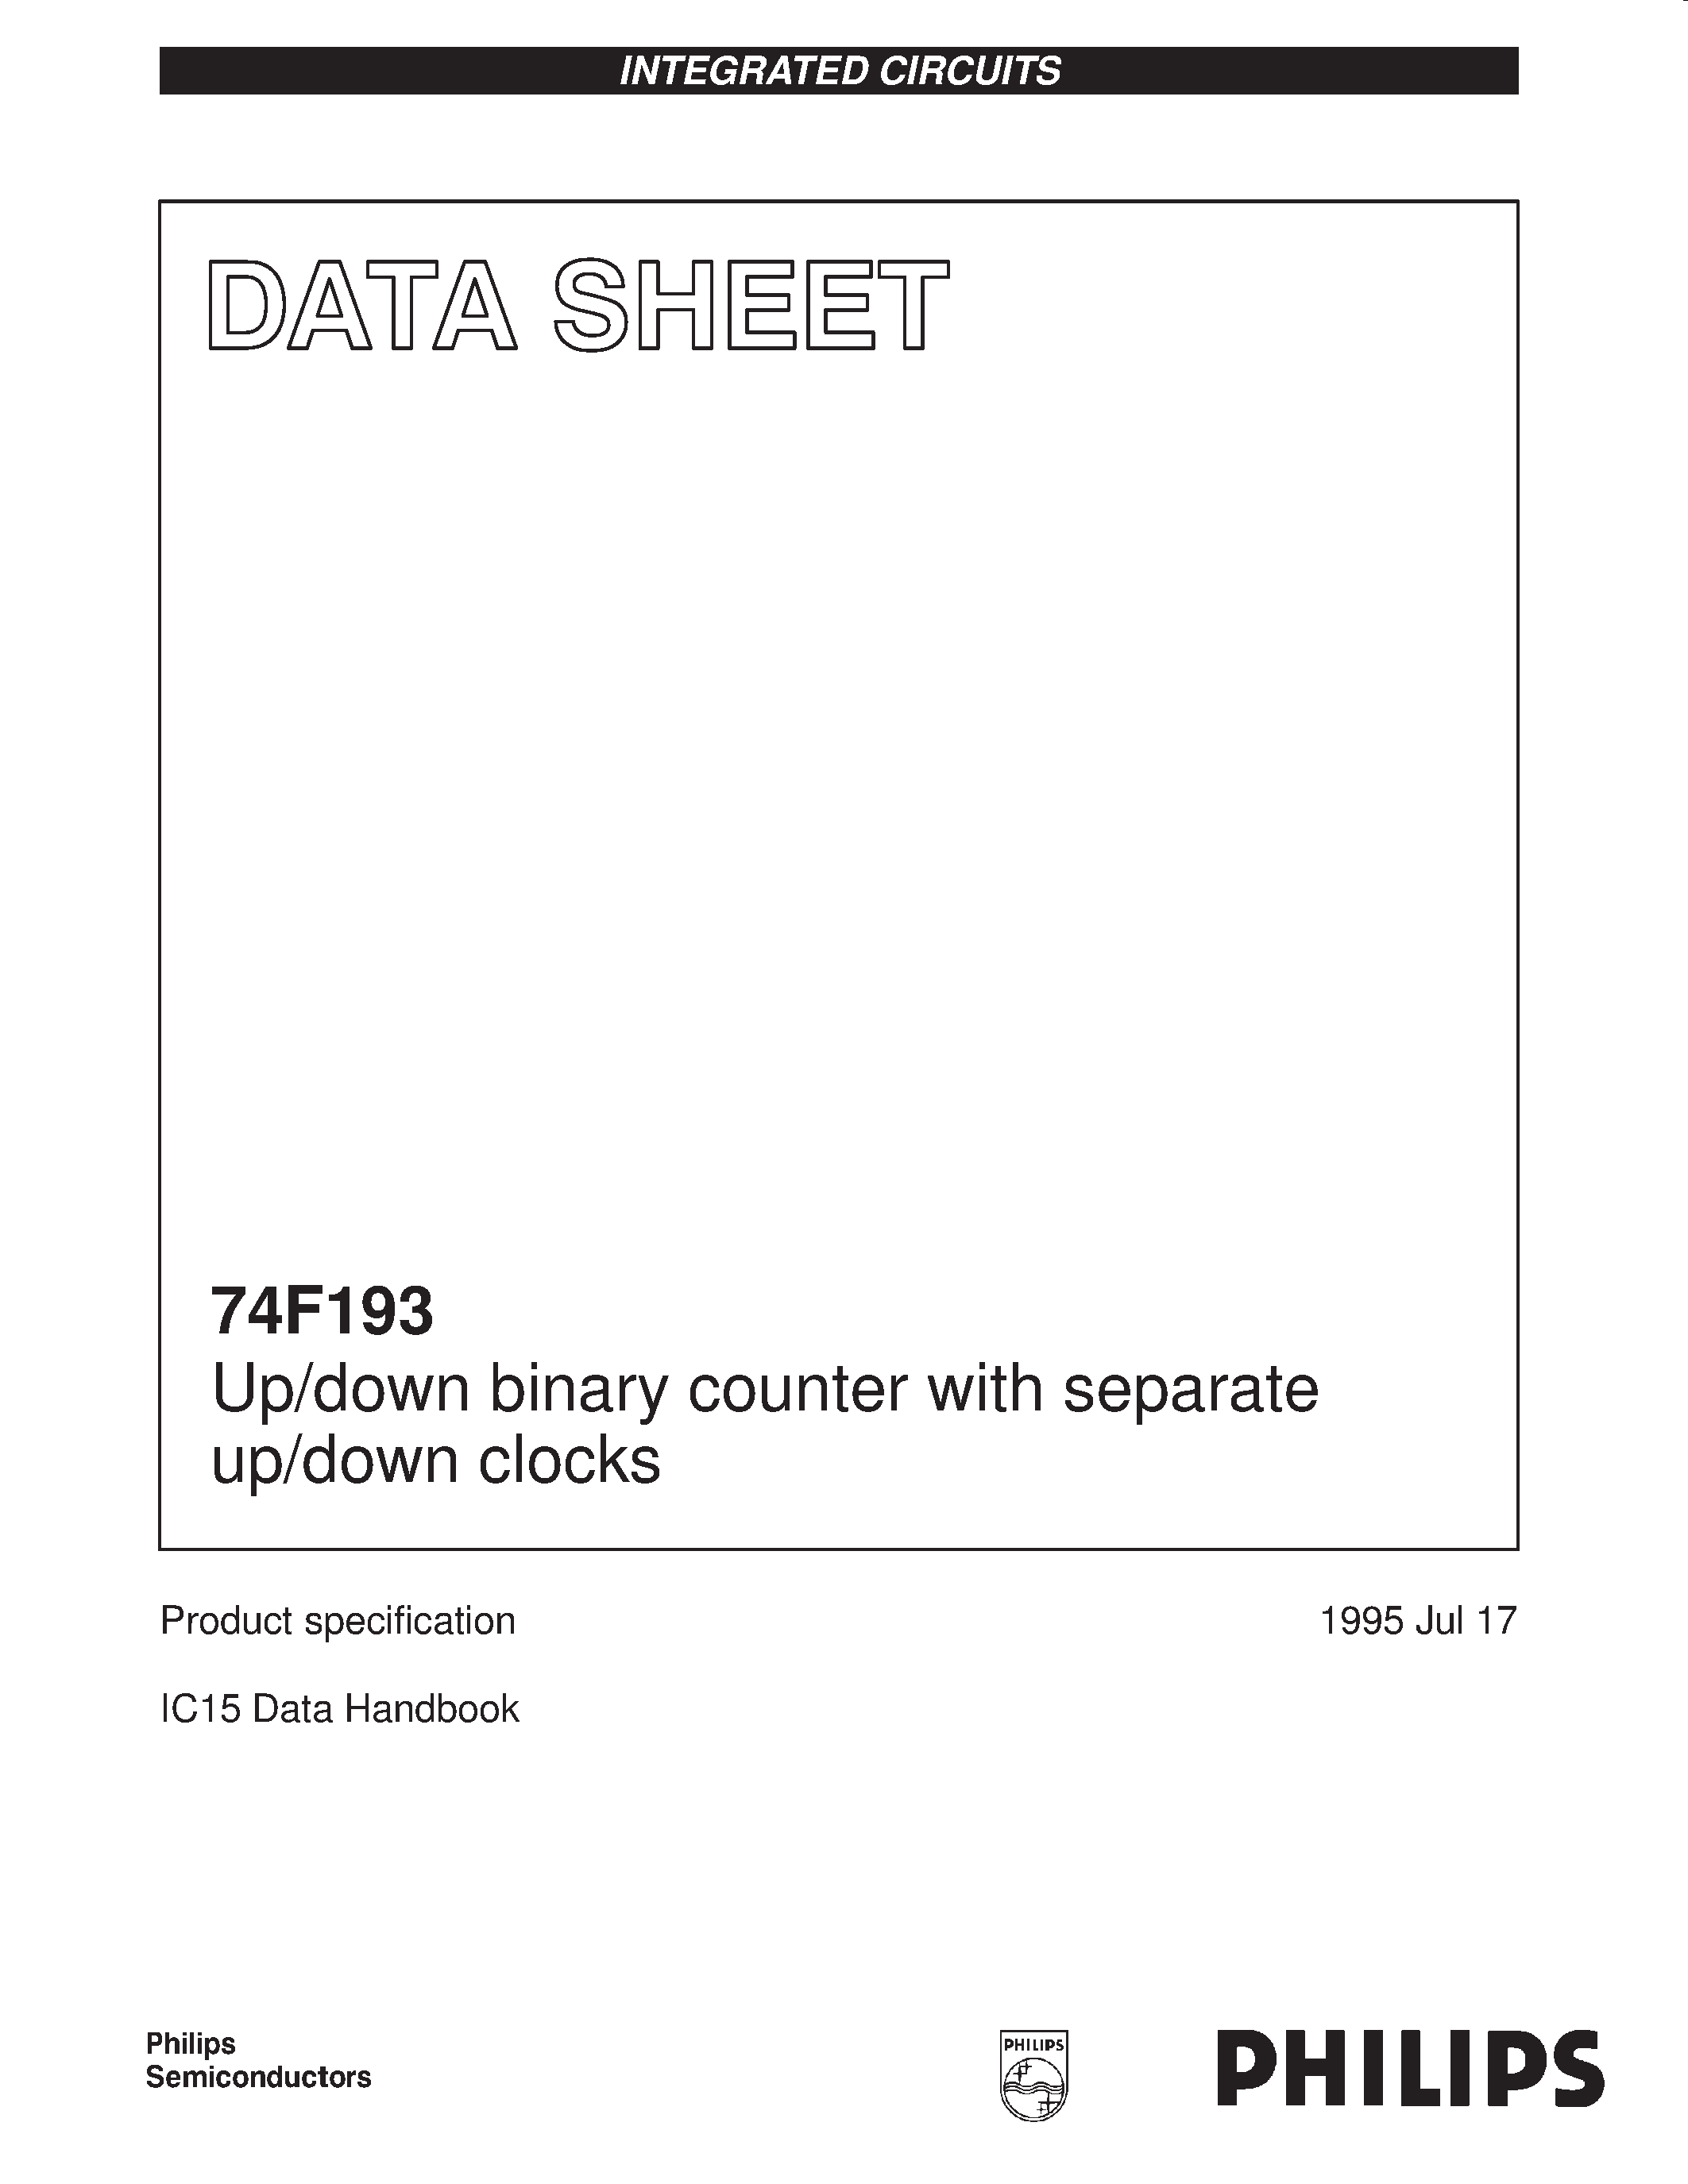 Datasheet 74F193 - Up/down binary counter with separate up/down clocks page 1